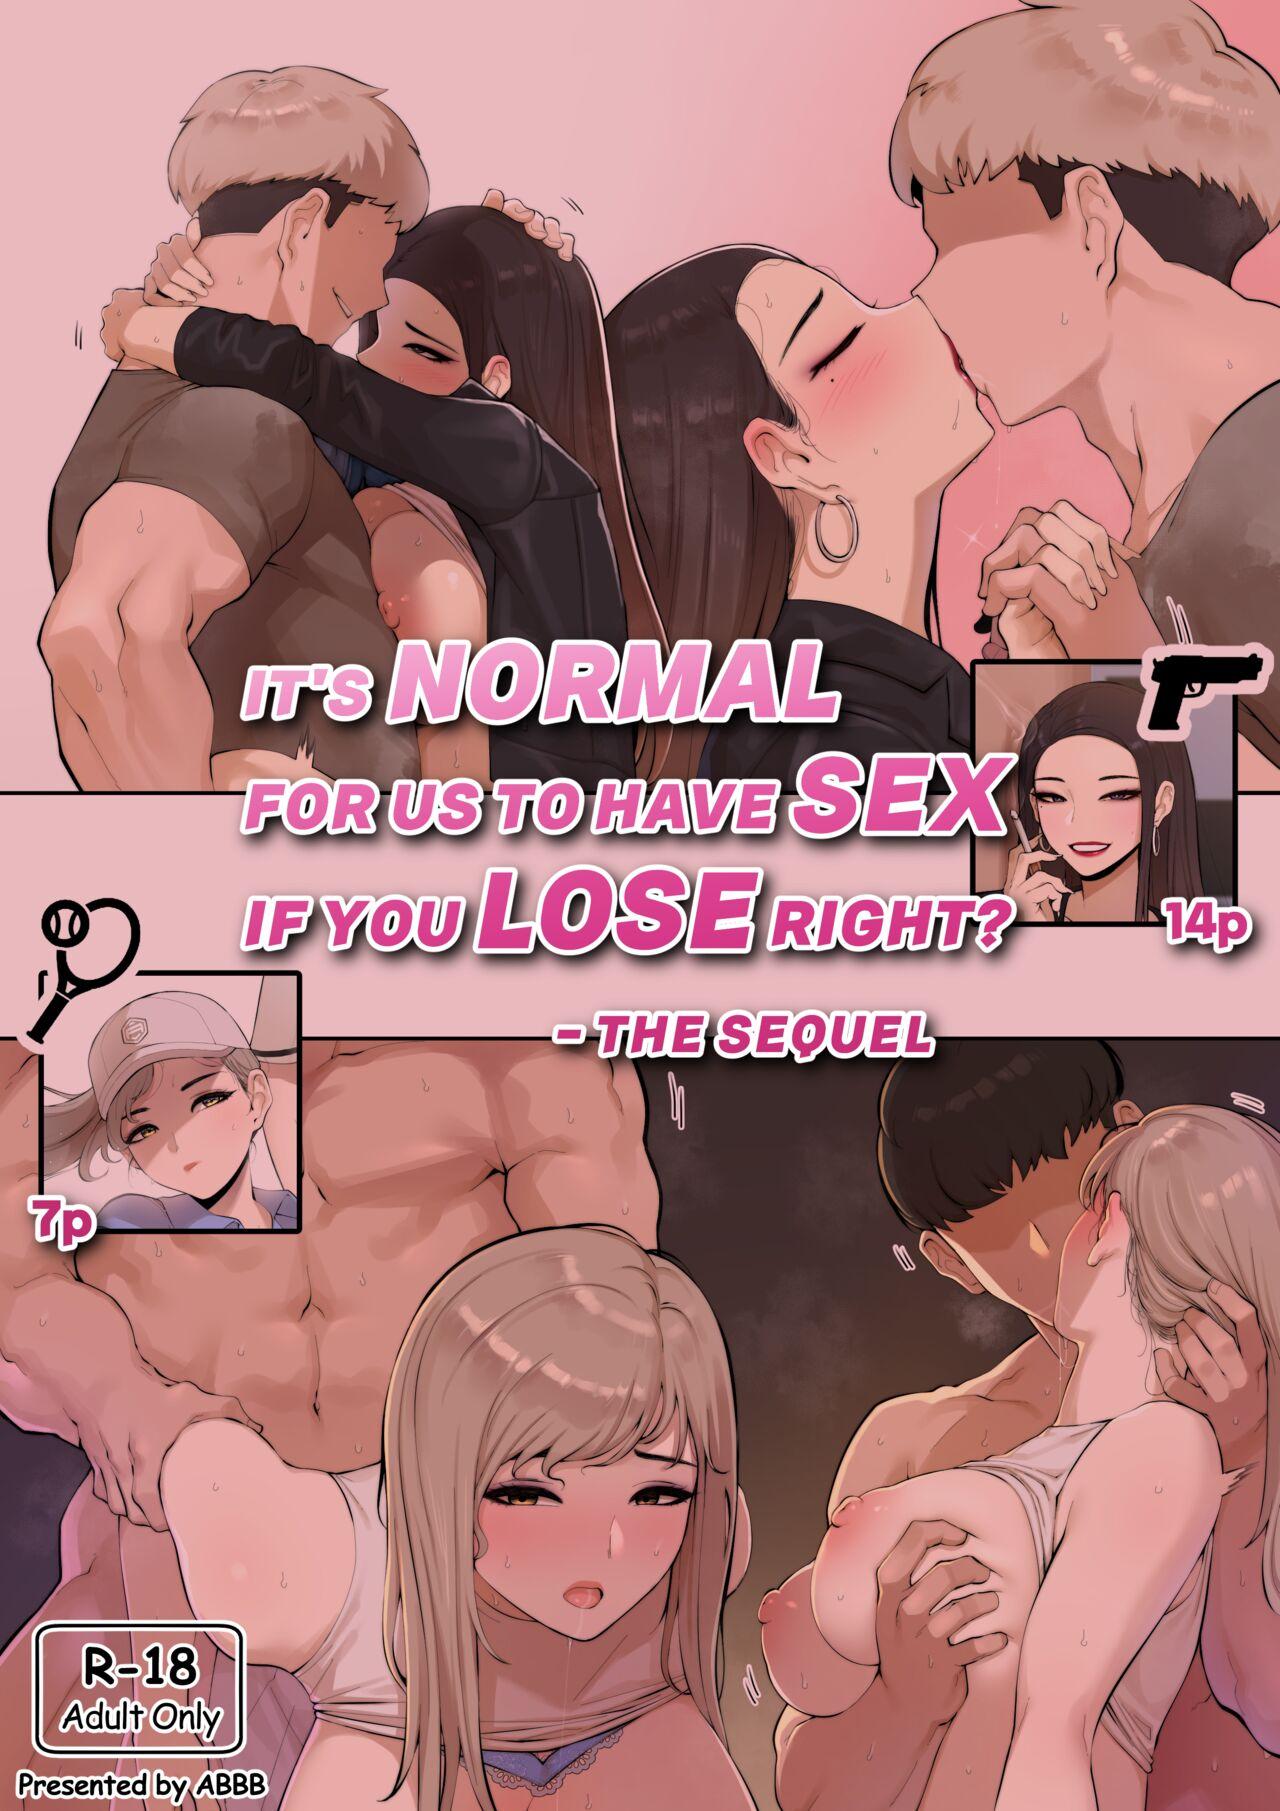 Amatures Gone Wild It's Normal for us to Have Sex if You Lose Right？ The sequel | 输了挨操不是很正常的吗? 续篇 - Original Flagra - Page 1